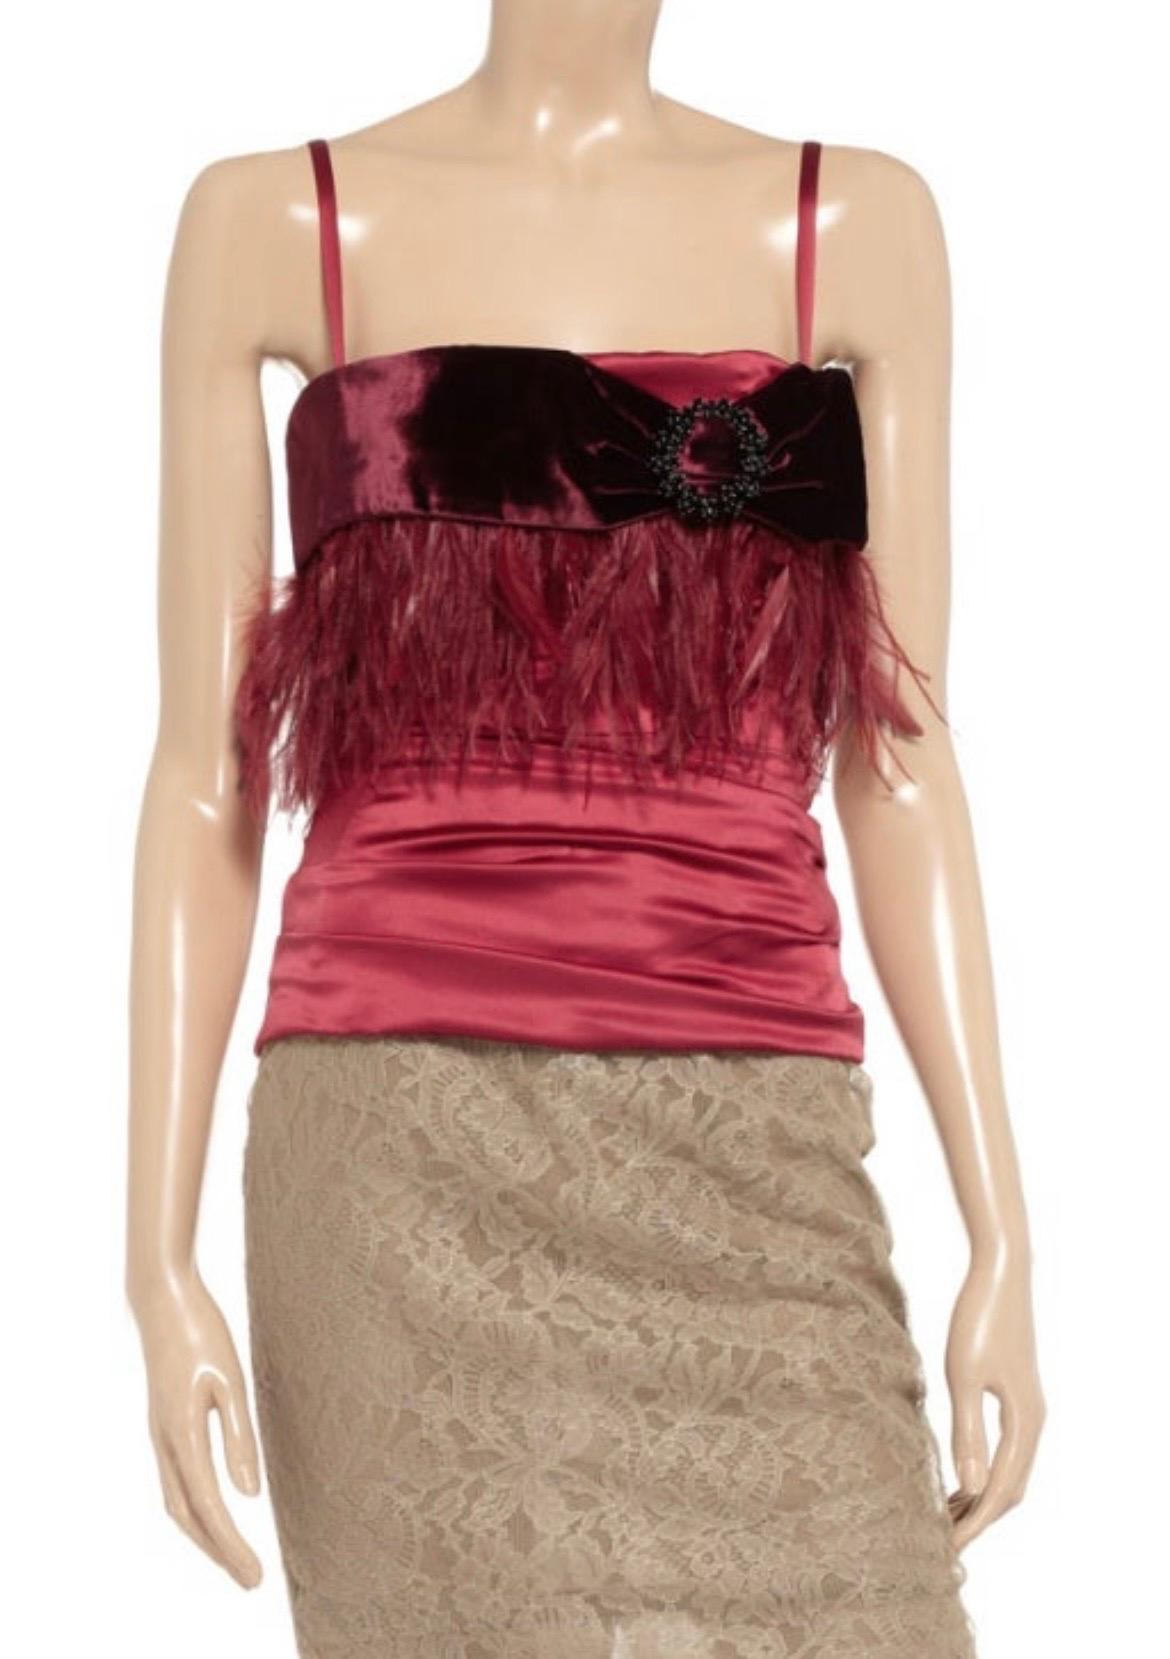 Dolce & Gabbana Red Embellished Corset Top

Dolce & Gabbana deep-red top
Stretch-silk satin
Velvet trim, crystal and feather embellishment, internal molded bra, internal boning
Exposed zip fastening through back
86% silk, 4% spandex, 10% feathers